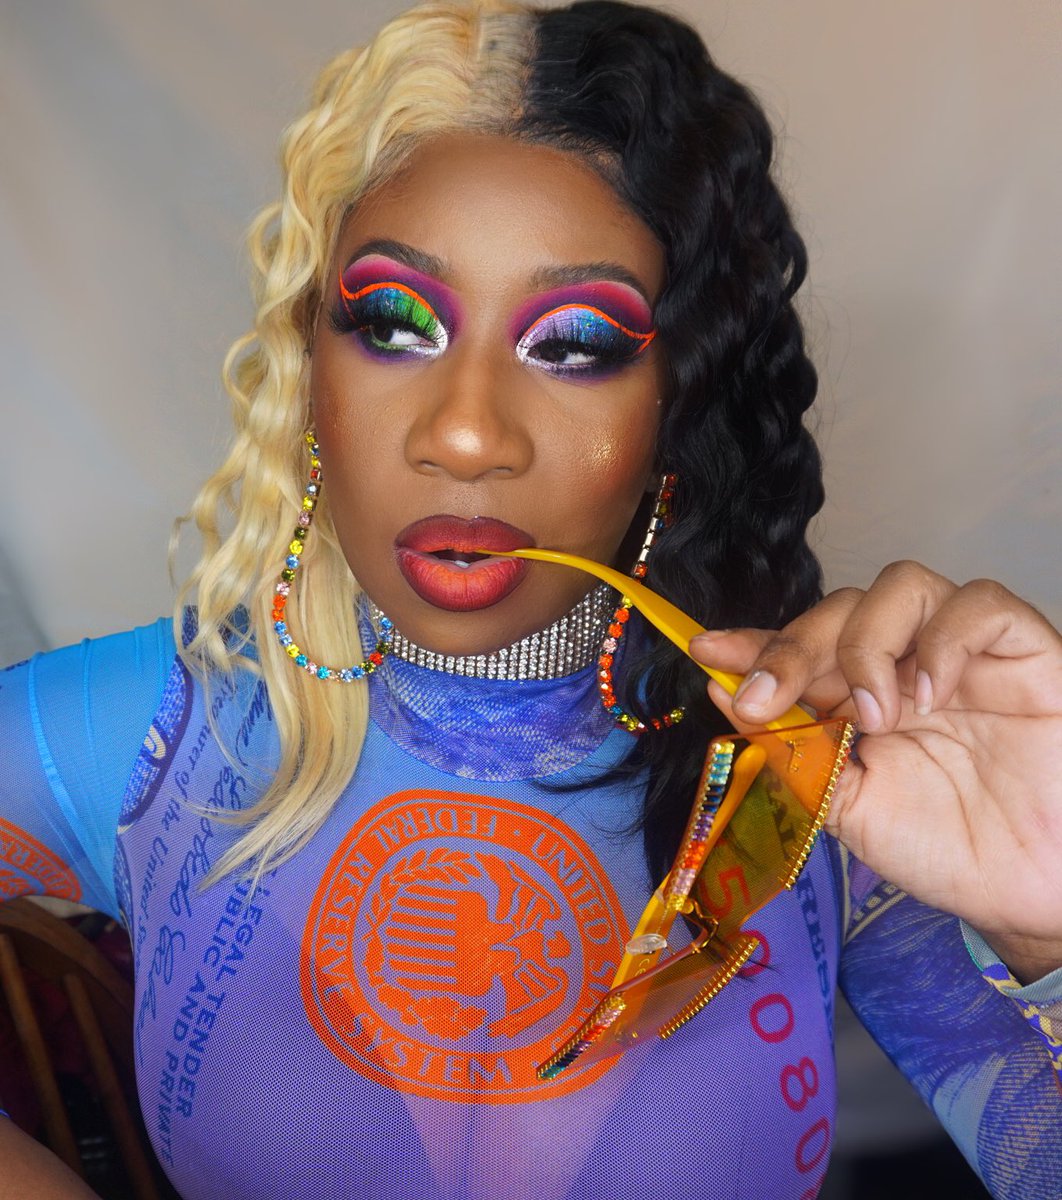 #reigneofbeauty👑 *Money* PRODUCTS USED: @reigneofbeauty 👑Mink eyelashes E109 👑Orange sherbet ombré @thecrayoncase 🖍Chalk dust O and Y 🖍The blush binder 🖍Hilary velvet matte lippie @MACcosmetics @juviasplace @beccacosmetics @urbandecaycosmetics #crayoncutie #wigs